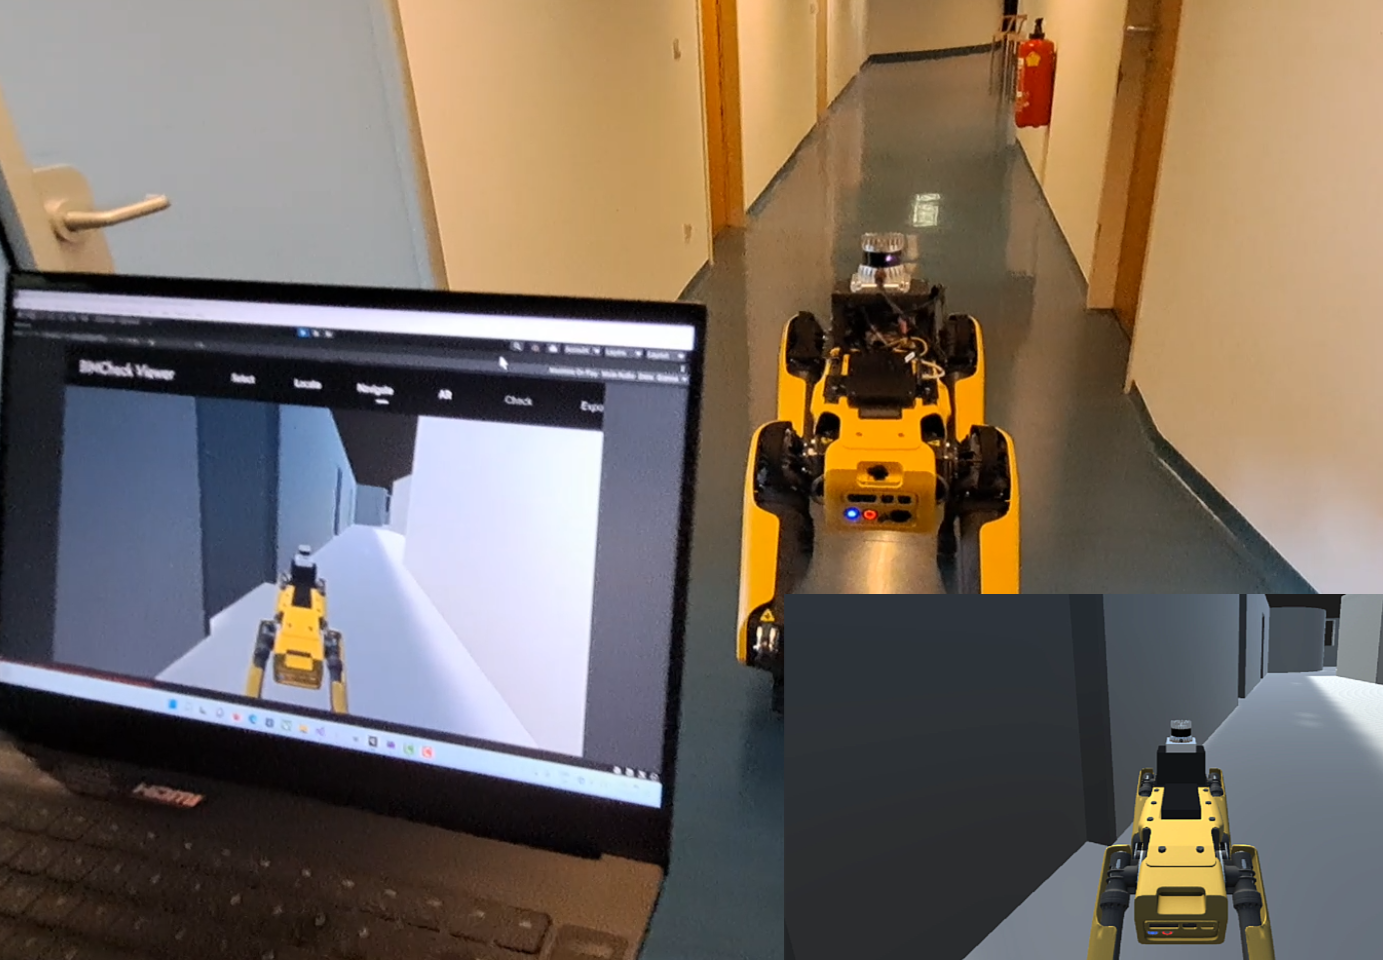 Spot robot collecting a point cloud of the building to compare it to the BIM model.